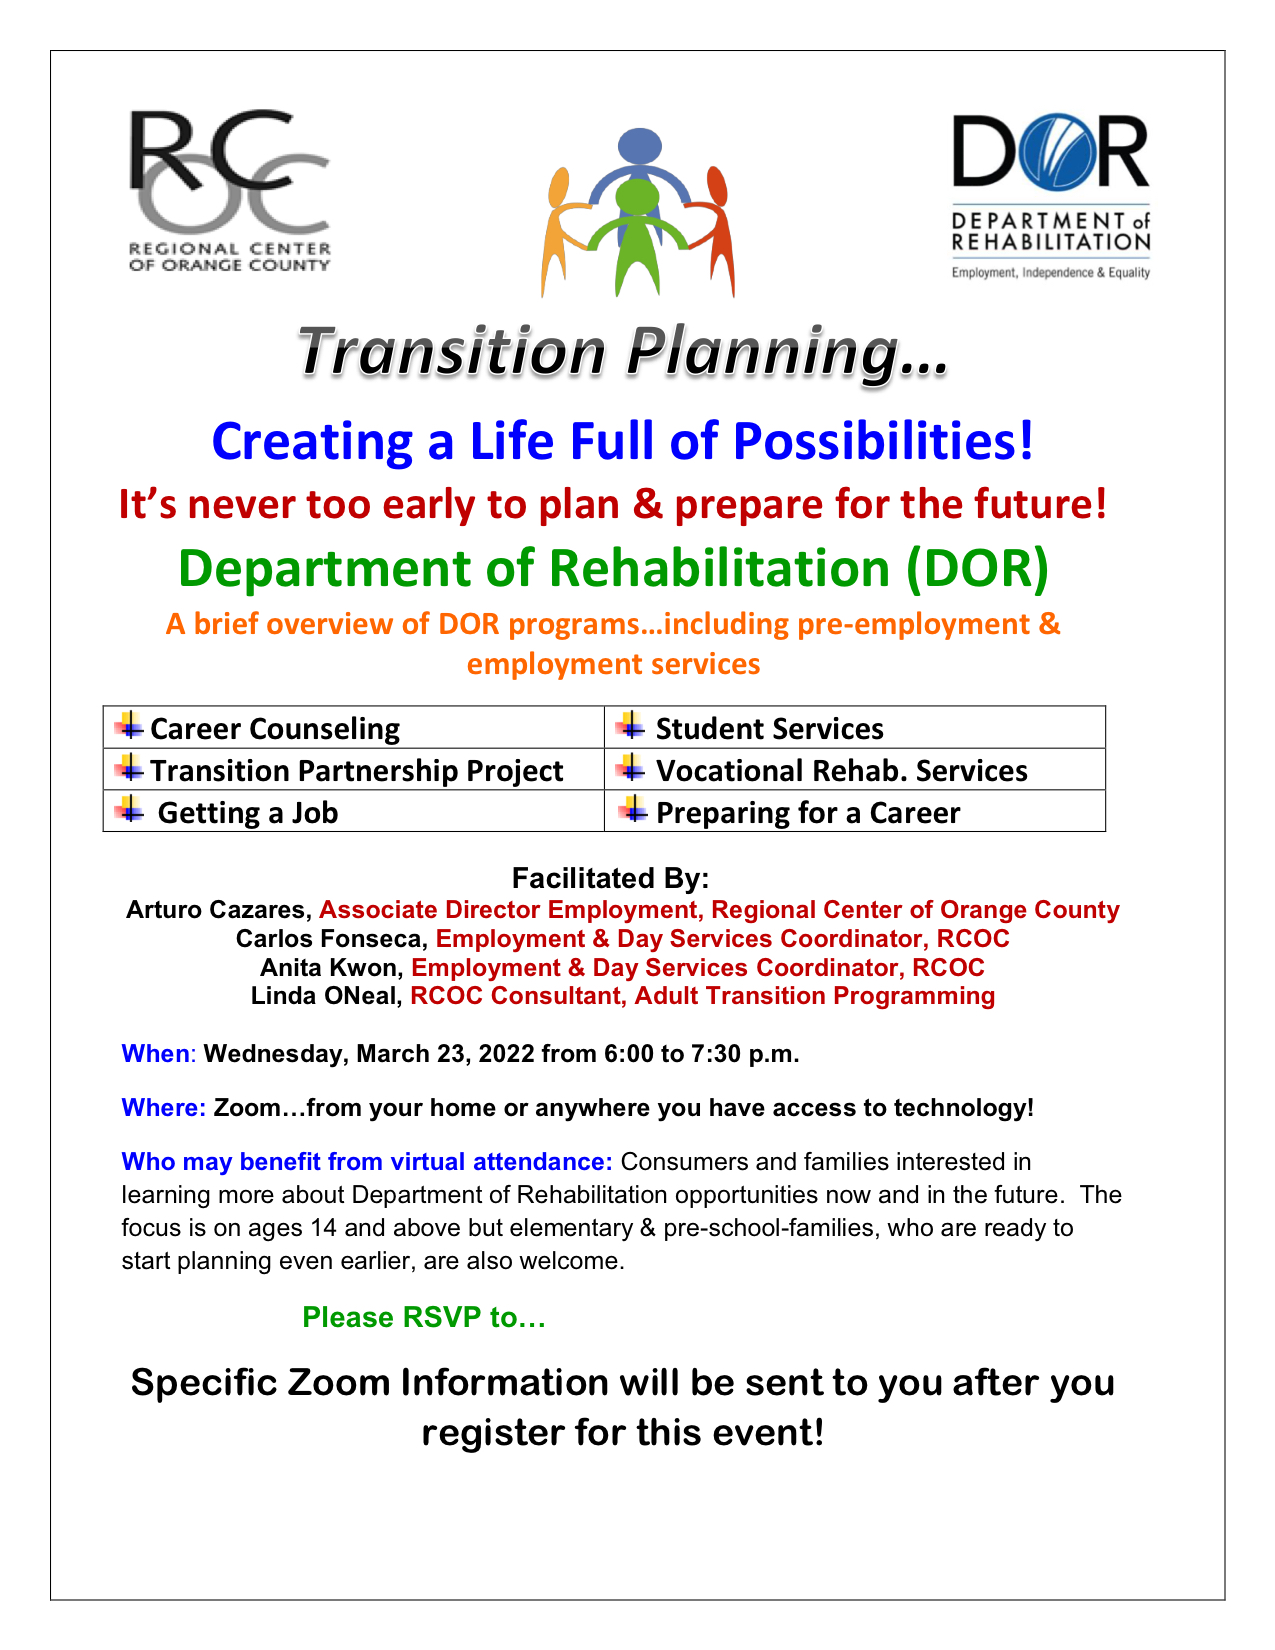 Thumbnail image of the flyer